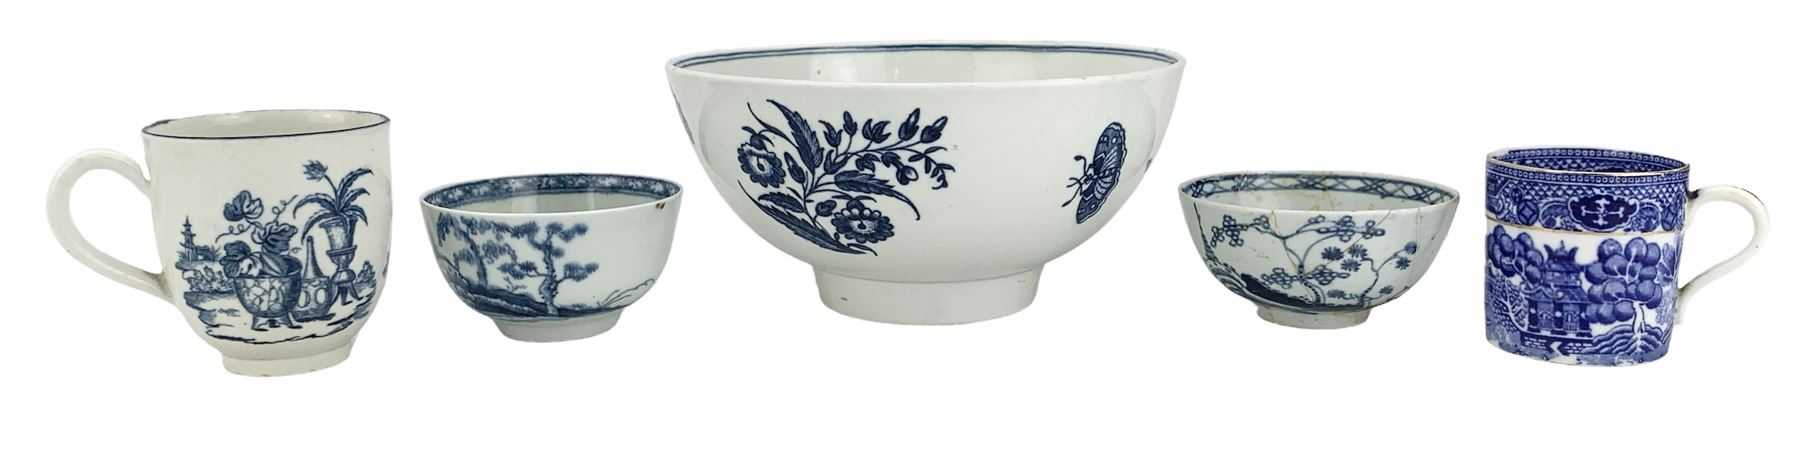 Early Worcester slop bowl decorated in the three flowers pattern c1780 - Image 9 of 9